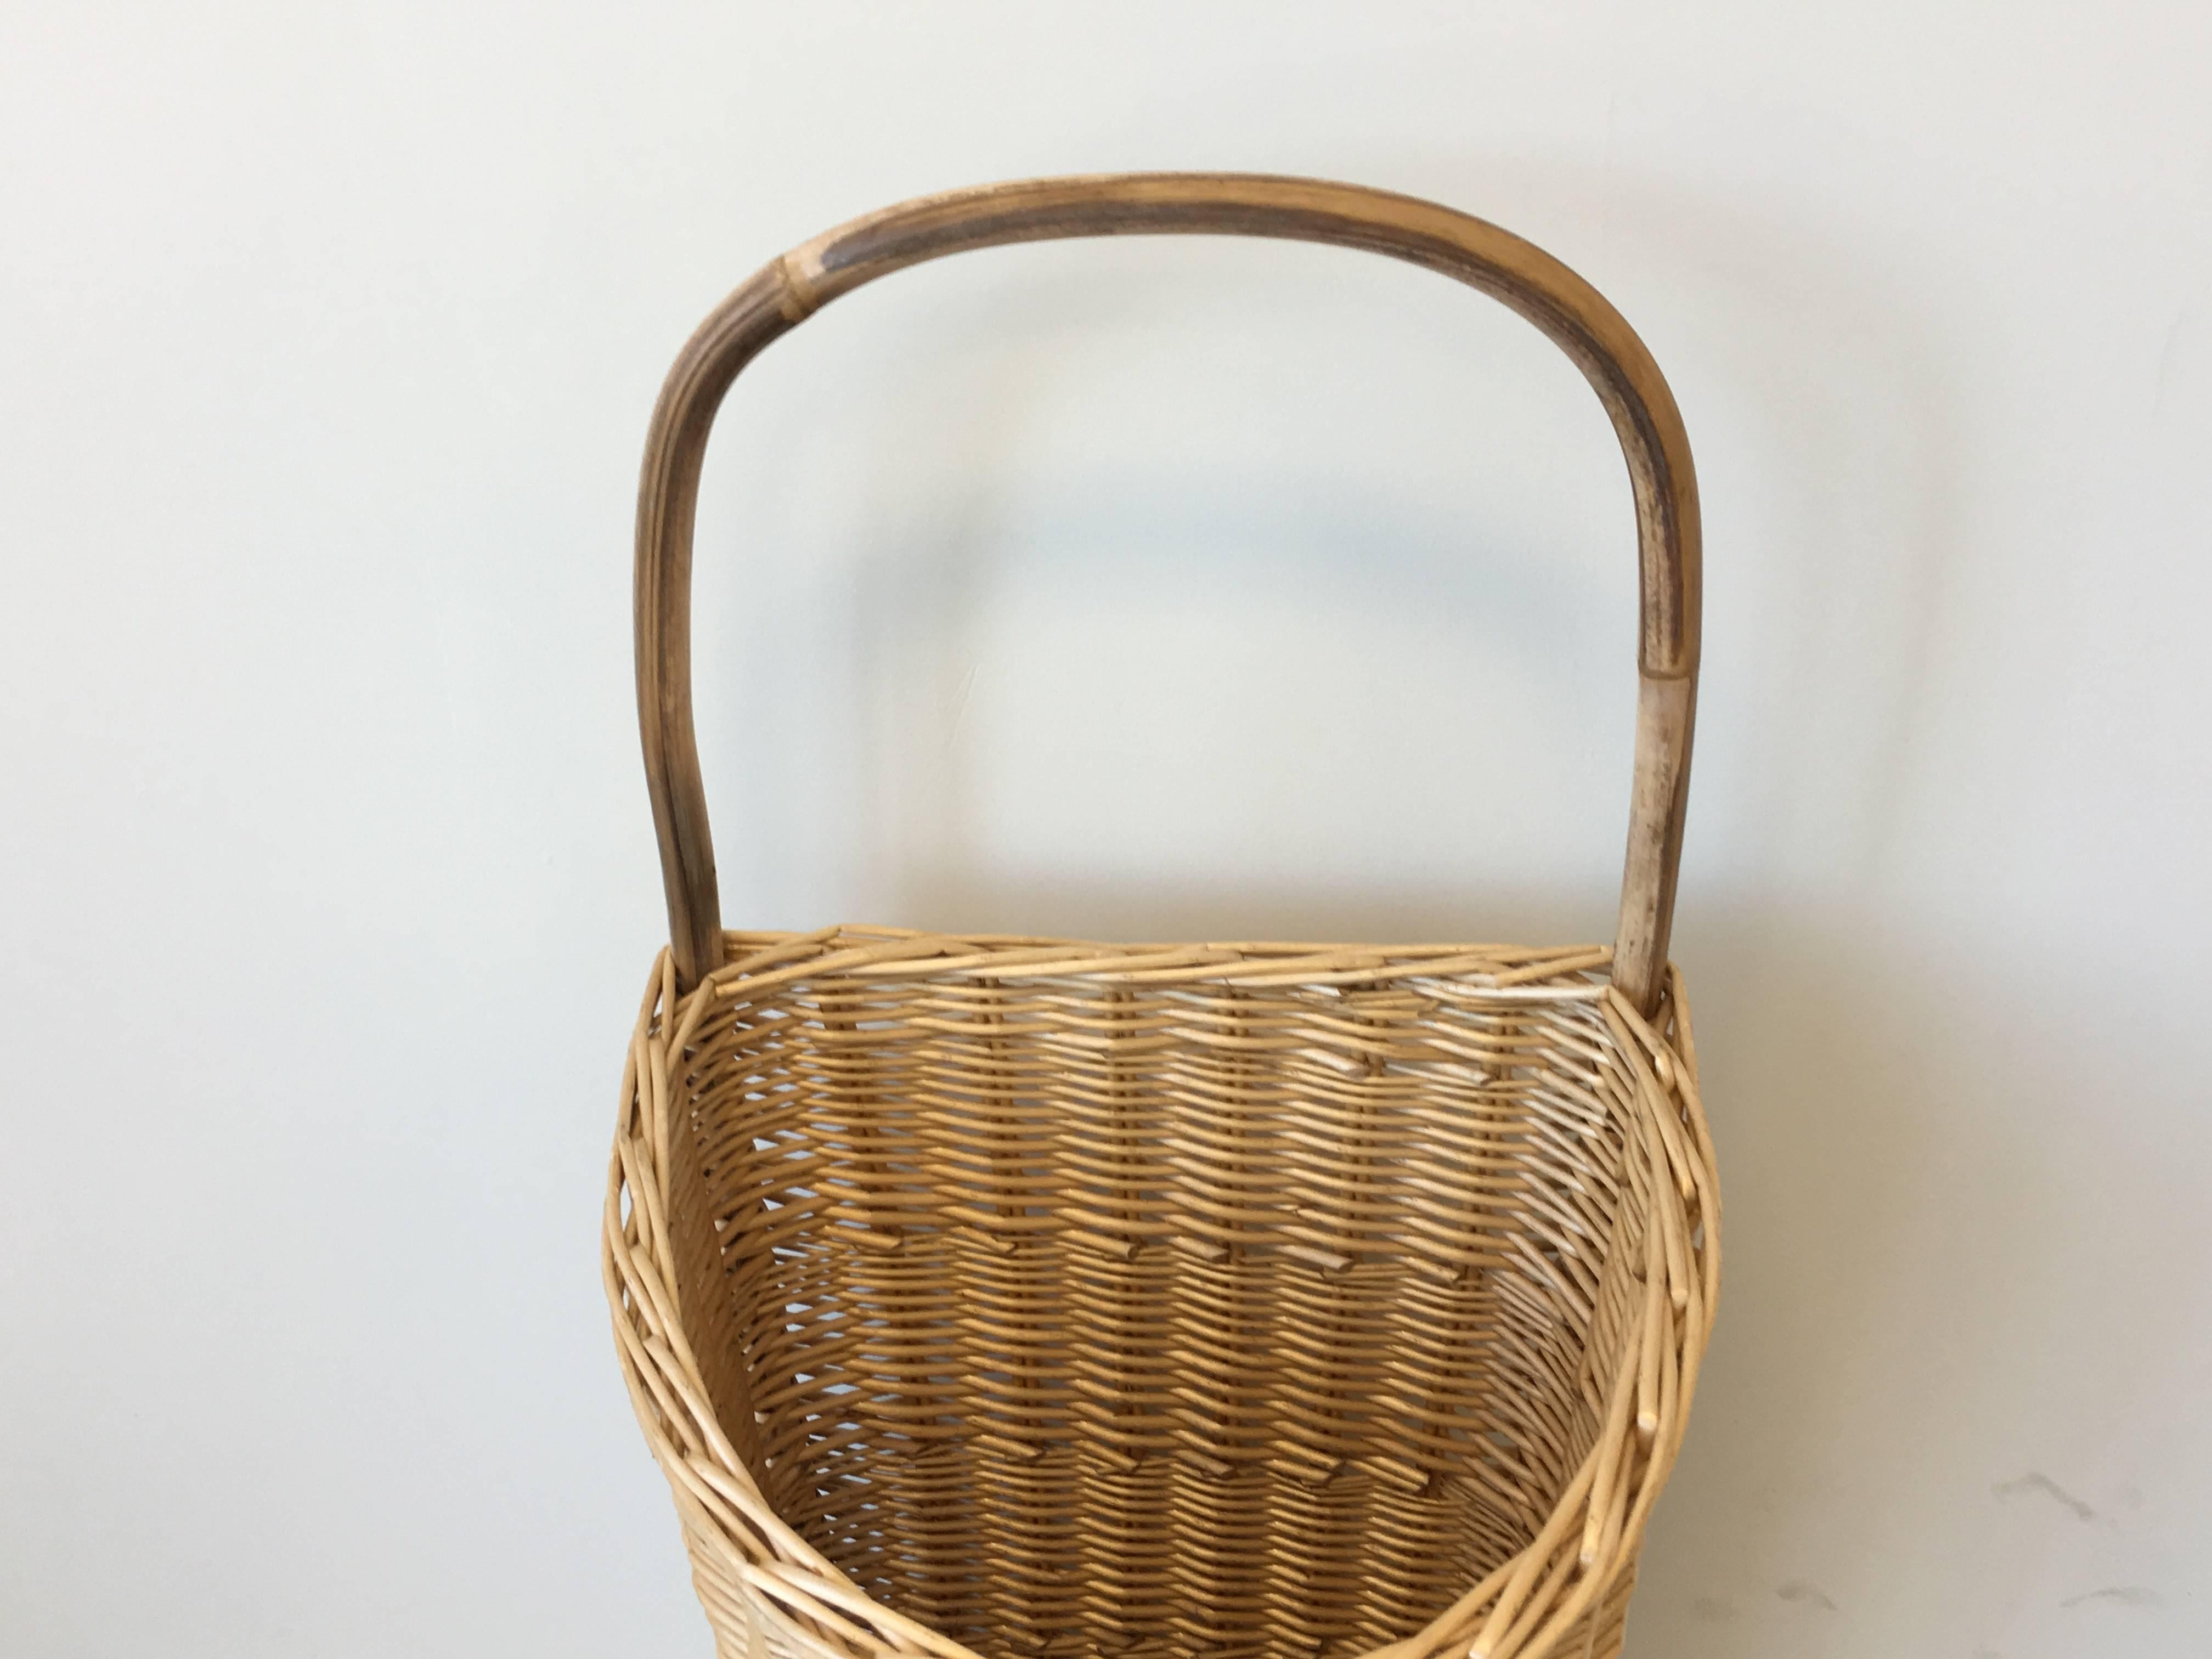 Offered is a beautiful, 1960s English market cart. Made of wicker, with a bamboo handle. Would make a perfect umbrella stand!